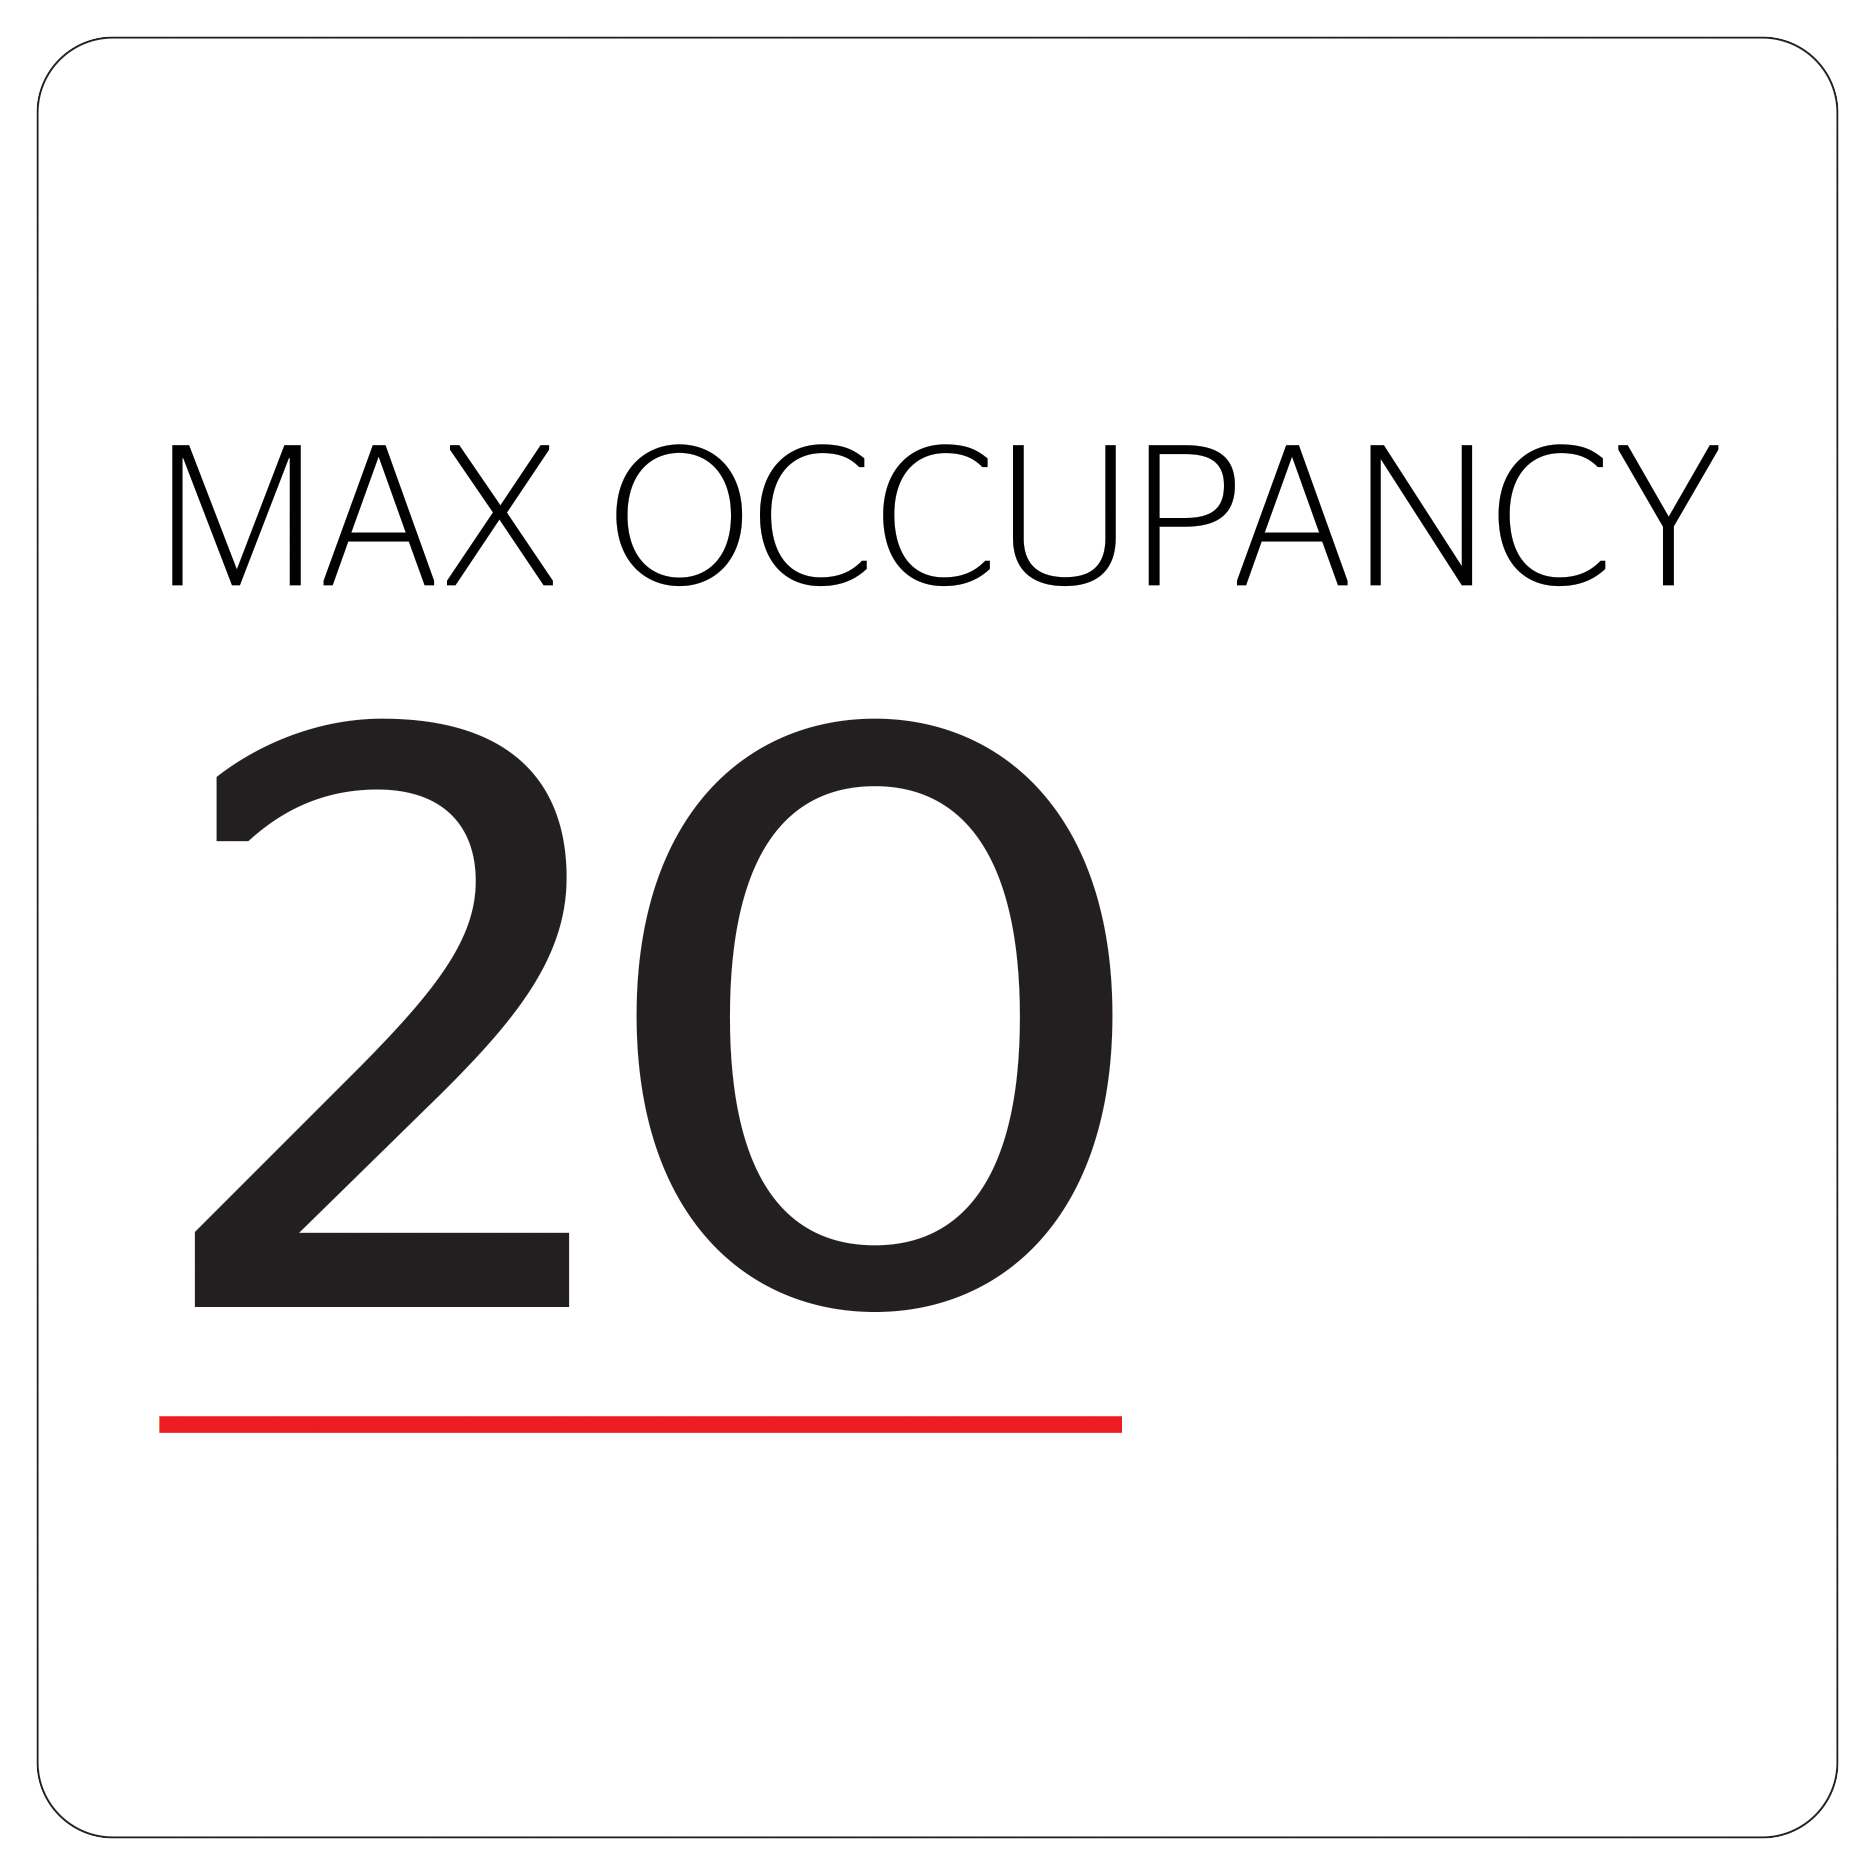 Gone are the days of stuffing as many people into a space as we can. Post Room Occupancy Signs to help social distancing and minimize crowding.